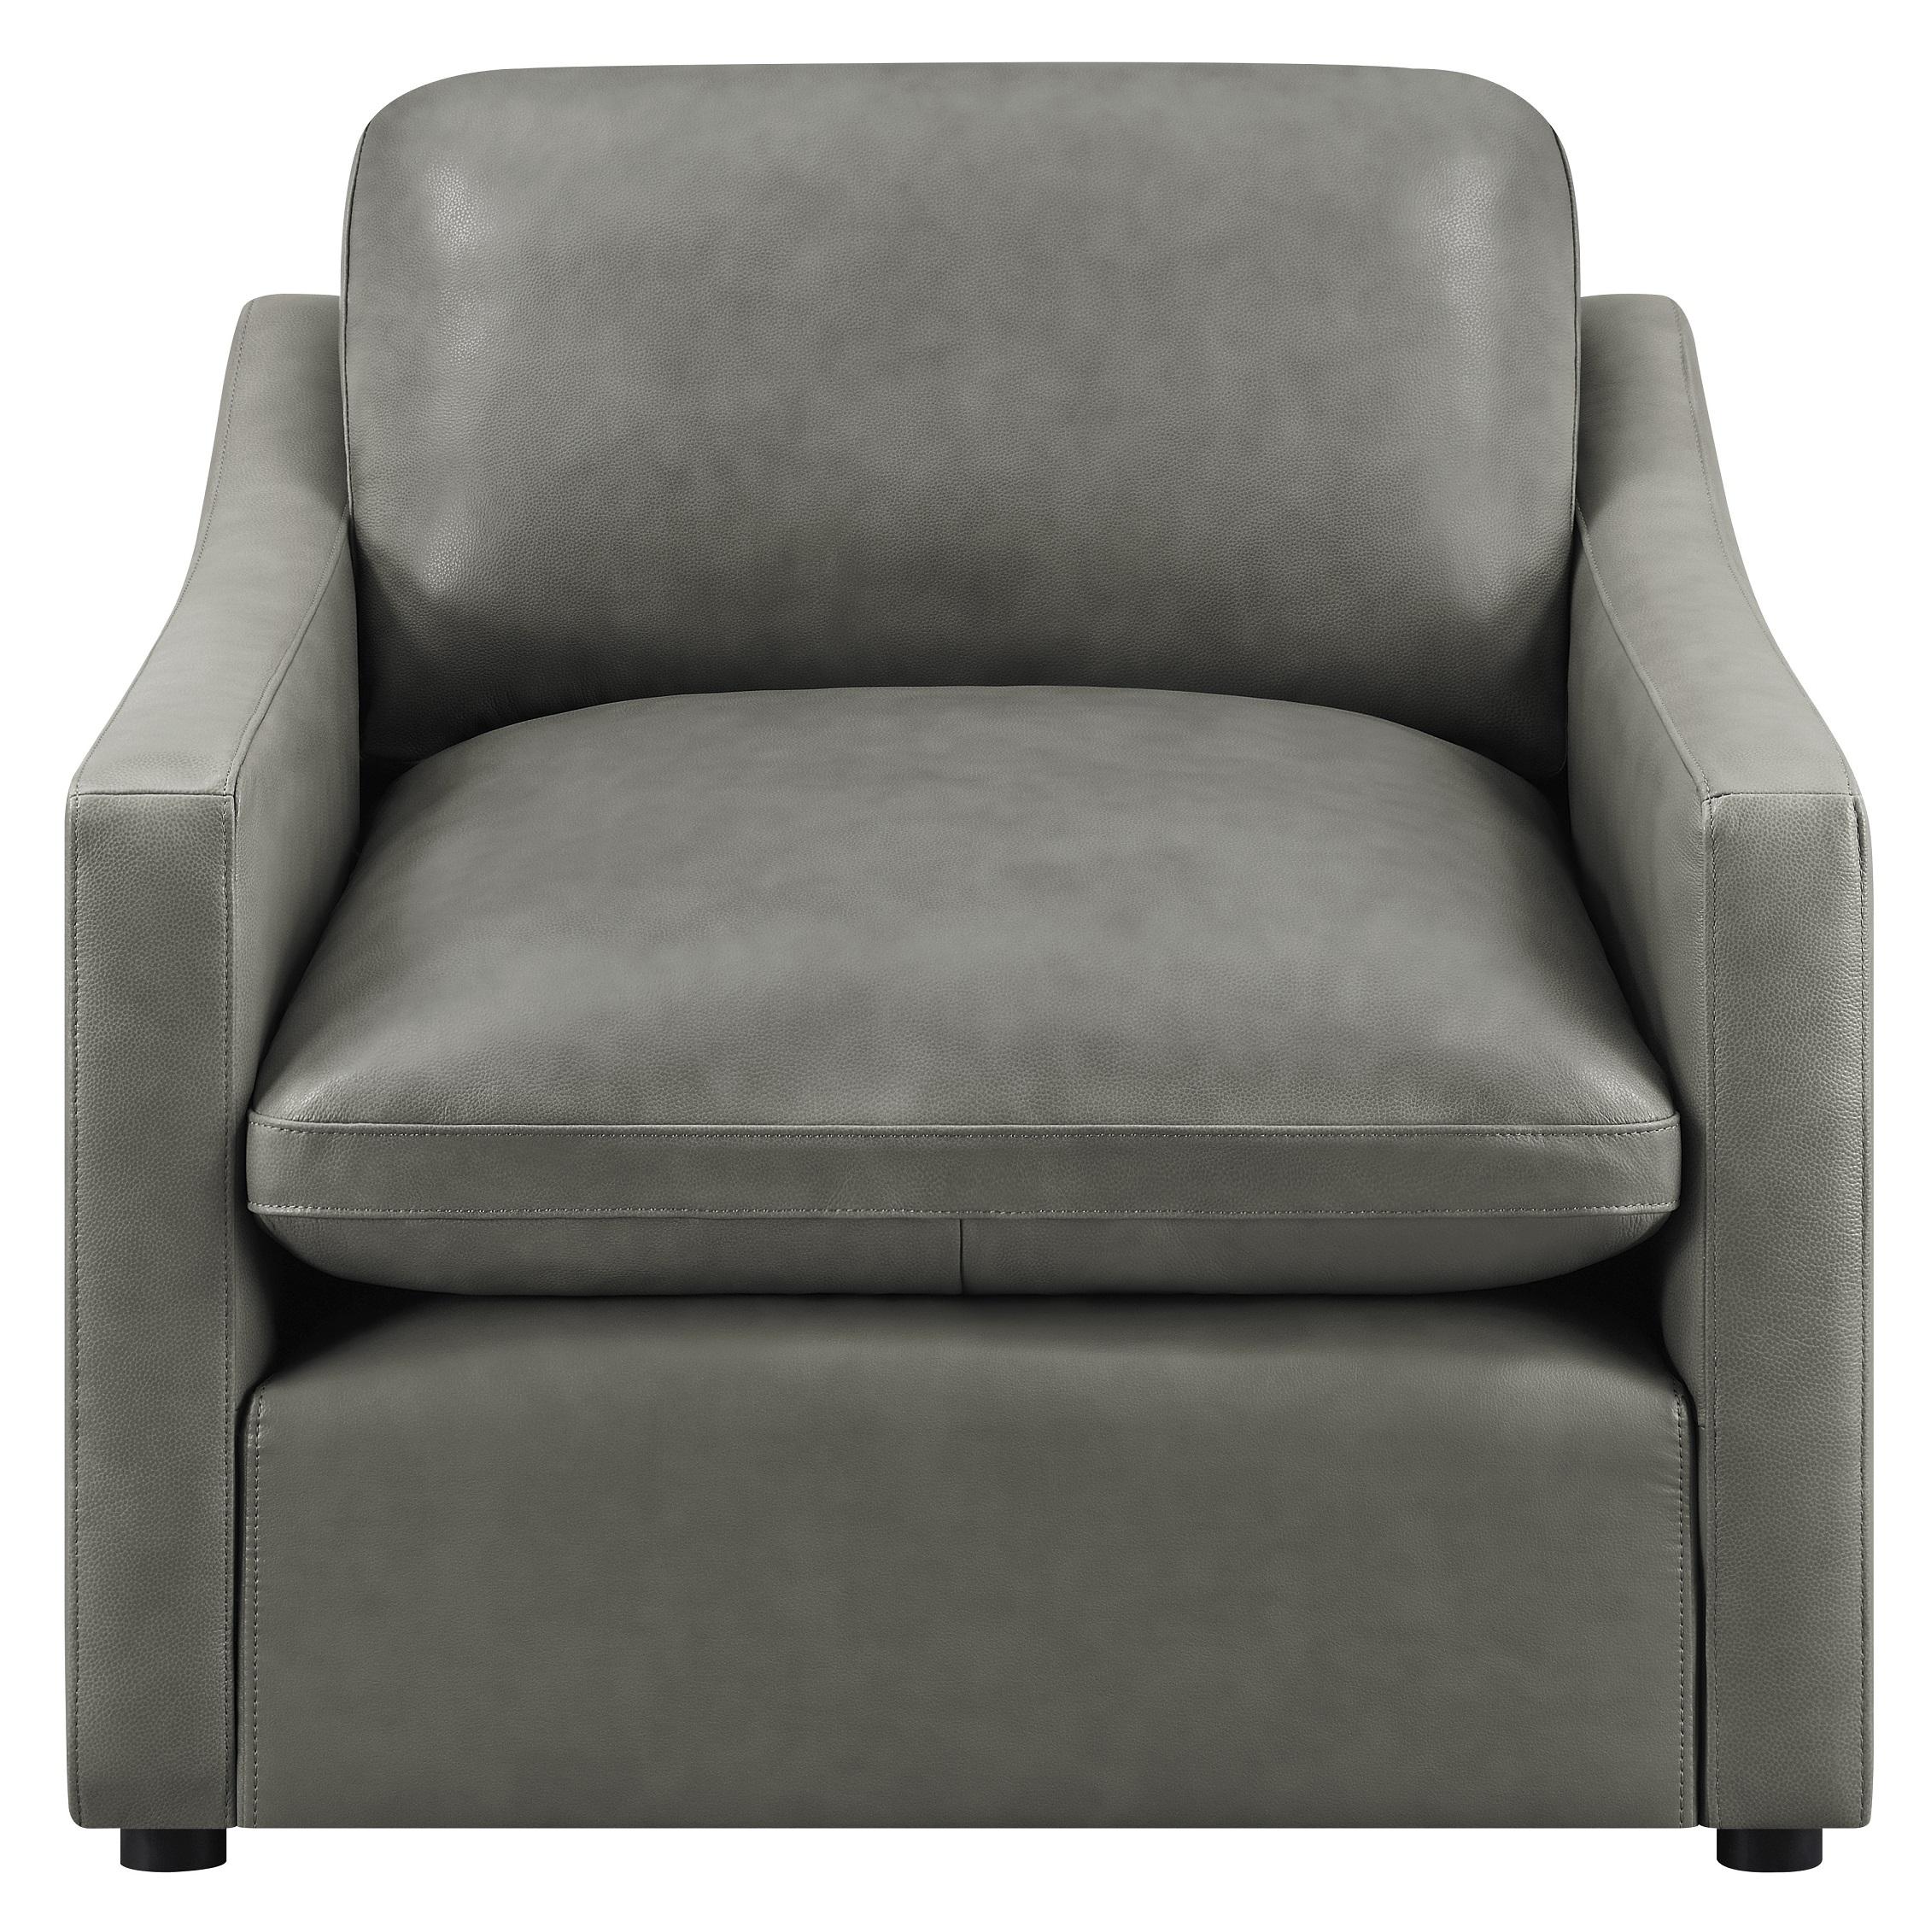 Modern Arm Chair 506773 Grayson 506773 in Gray Leather